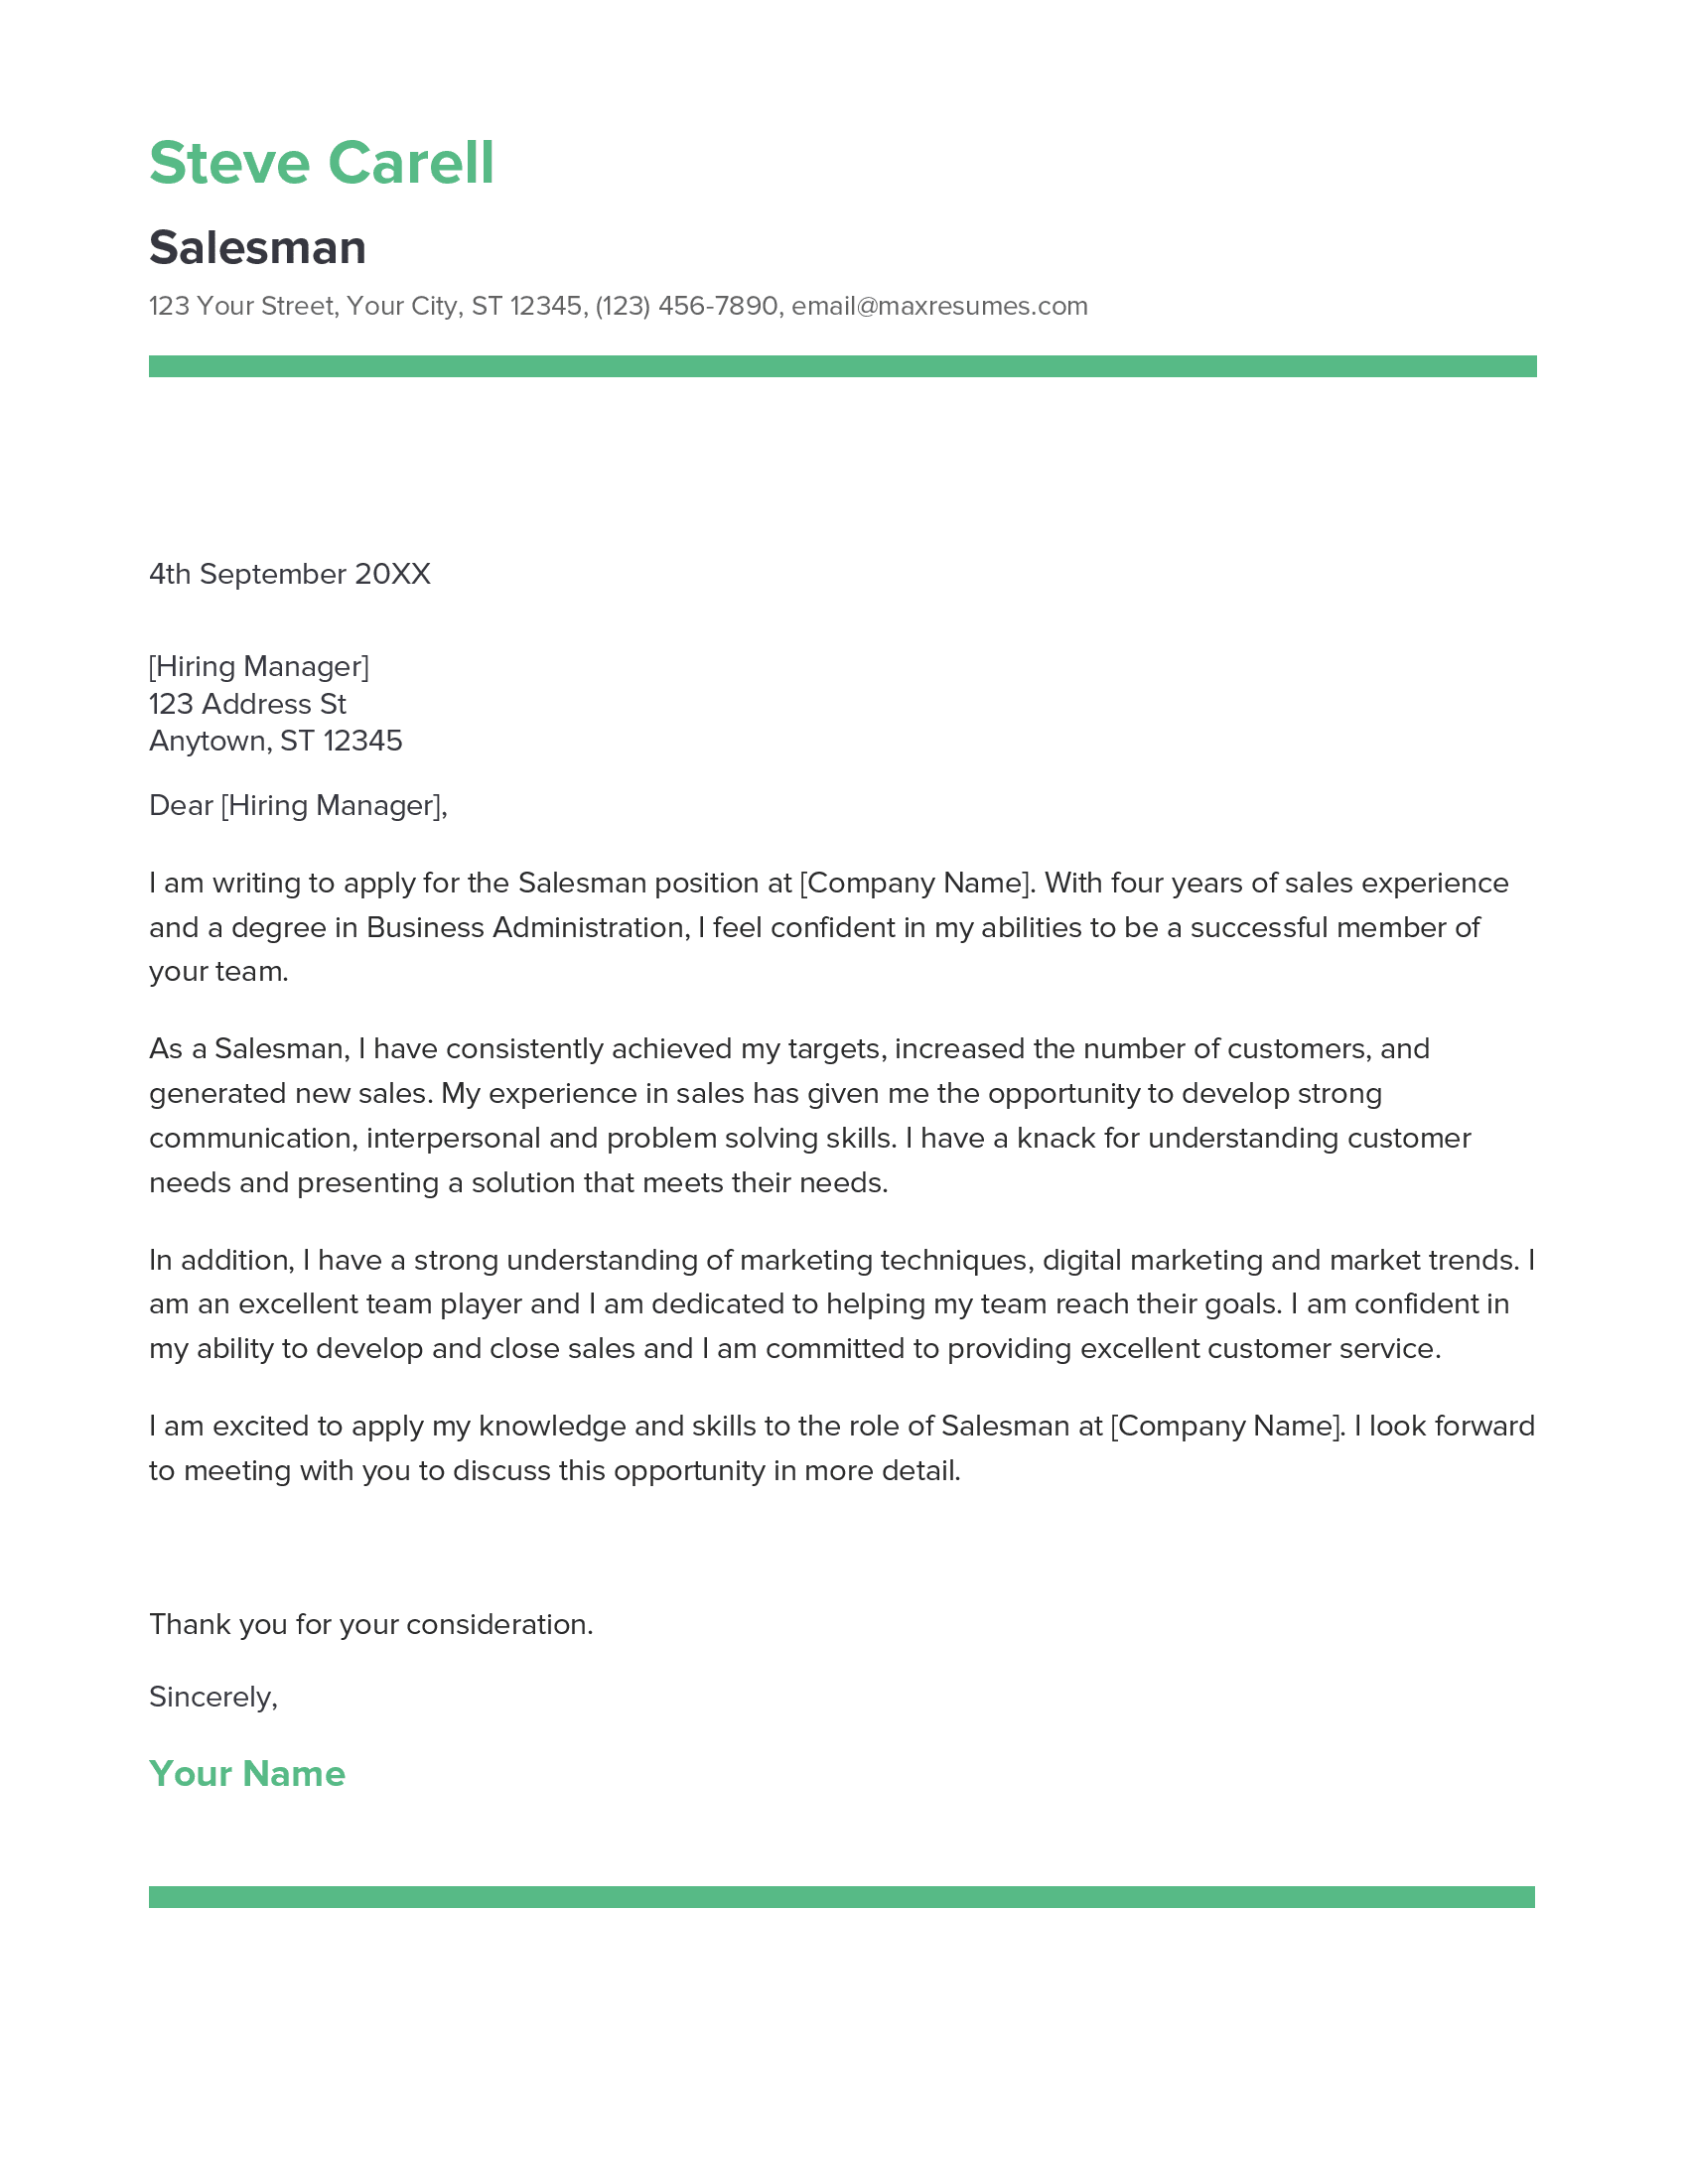 Salesman Cover Letter Example